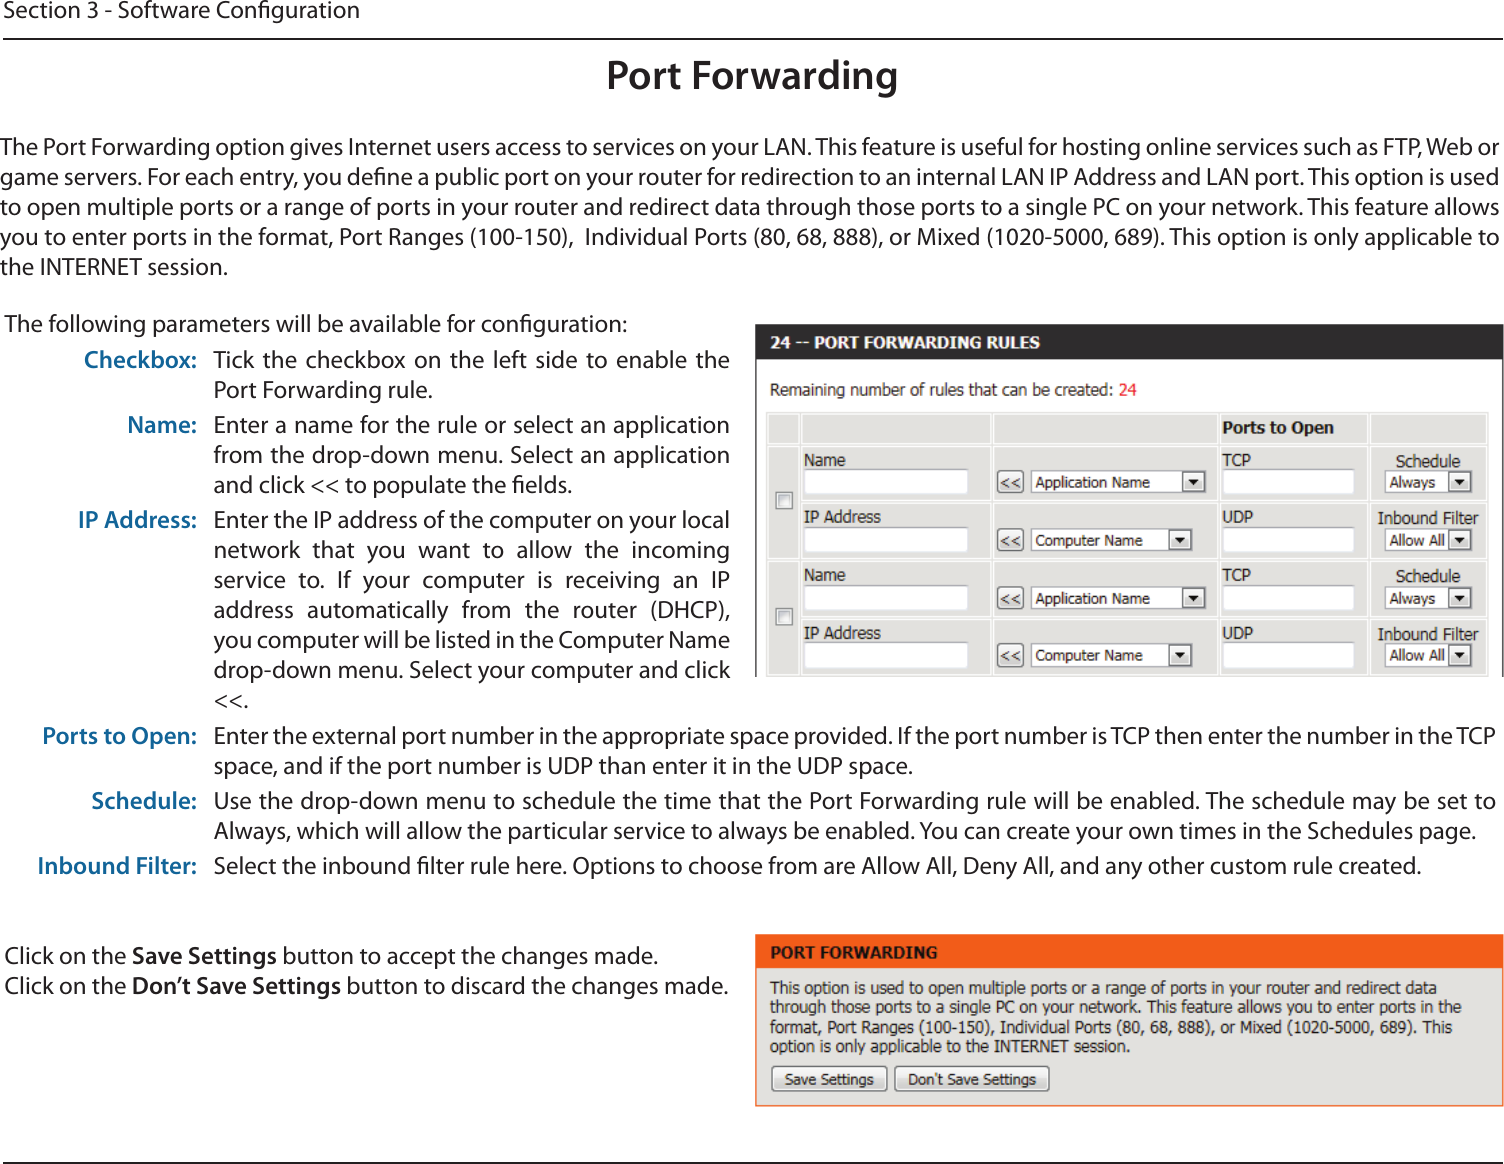 Section 3 - Software CongurationPort ForwardingThe Port Forwarding option gives Internet users access to services on your LAN. This feature is useful for hosting online services such as FTP, Web or game servers. For each entry, you dene a public port on your router for redirection to an internal LAN IP Address and LAN port. This option is used to open multiple ports or a range of ports in your router and redirect data through those ports to a single PC on your network. This feature allows you to enter ports in the format, Port Ranges (100-150),  Individual Ports (80, 68, 888), or Mixed (1020-5000, 689). This option is only applicable to the INTERNET session.The following parameters will be available for conguration:Checkbox: Tick the  checkbox on  the  left  side  to  enable  the Port Forwarding rule.Name: Enter a name for the rule or select an application from the drop-down menu. Select an application and click &lt;&lt; to populate the elds.IP Address: Enter the IP address of the computer on your local network  that  you  want  to  allow  the  incoming service  to.  If  your  computer  is  receiving  an  IP address  automatically  from  the  router  (DHCP), you computer will be listed in the Computer Name drop-down menu. Select your computer and click &lt;&lt;.Ports to Open: Enter the external port number in the appropriate space provided. If the port number is TCP then enter the number in the TCP space, and if the port number is UDP than enter it in the UDP space.Schedule: Use the drop-down menu to schedule the time that the Port Forwarding rule will be enabled. The schedule may be set to Always, which will allow the particular service to always be enabled. You can create your own times in the Schedules page.Inbound Filter: Select the inbound lter rule here. Options to choose from are Allow All, Deny All, and any other custom rule created.Click on the Save Settings button to accept the changes made.Click on the Don’t Save Settings button to discard the changes made.